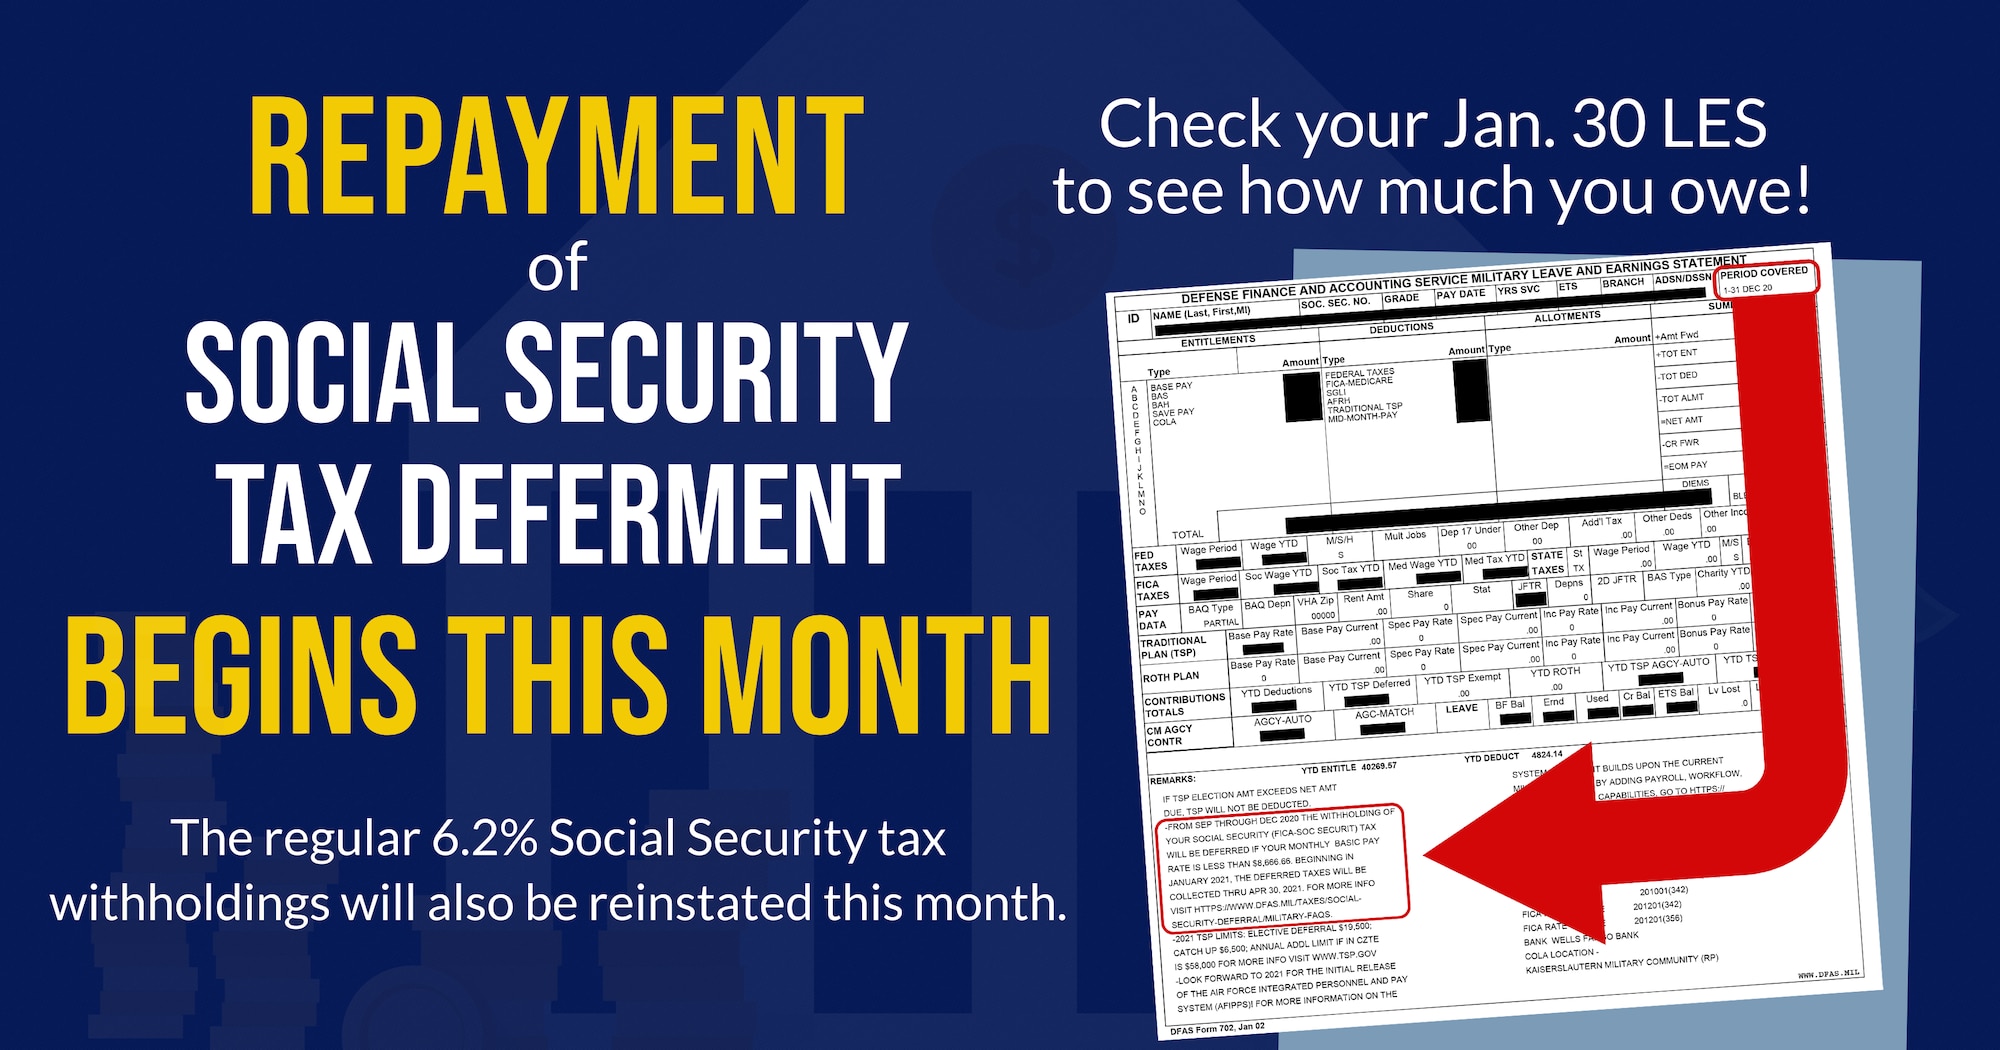 This graphic was created as a visual aid to accompany an article written about the tax deferment. (U.S. Air Force graphic by Senior Airman Jennifer Gonzales)